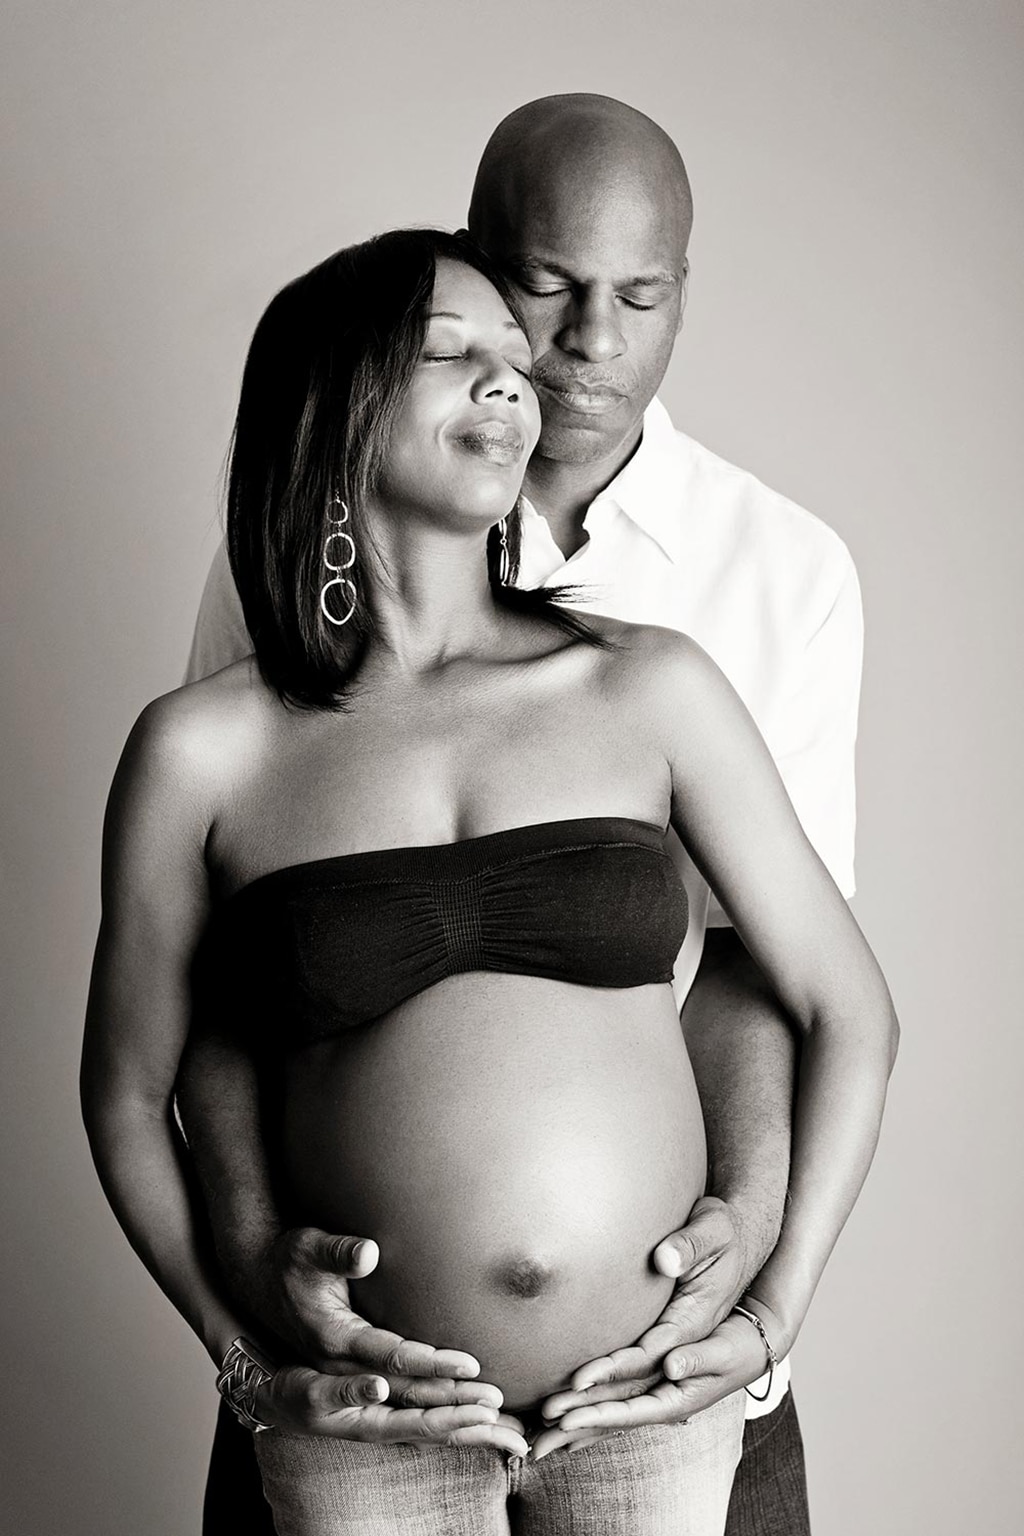 gorgeous maternity session in private studio with family involved